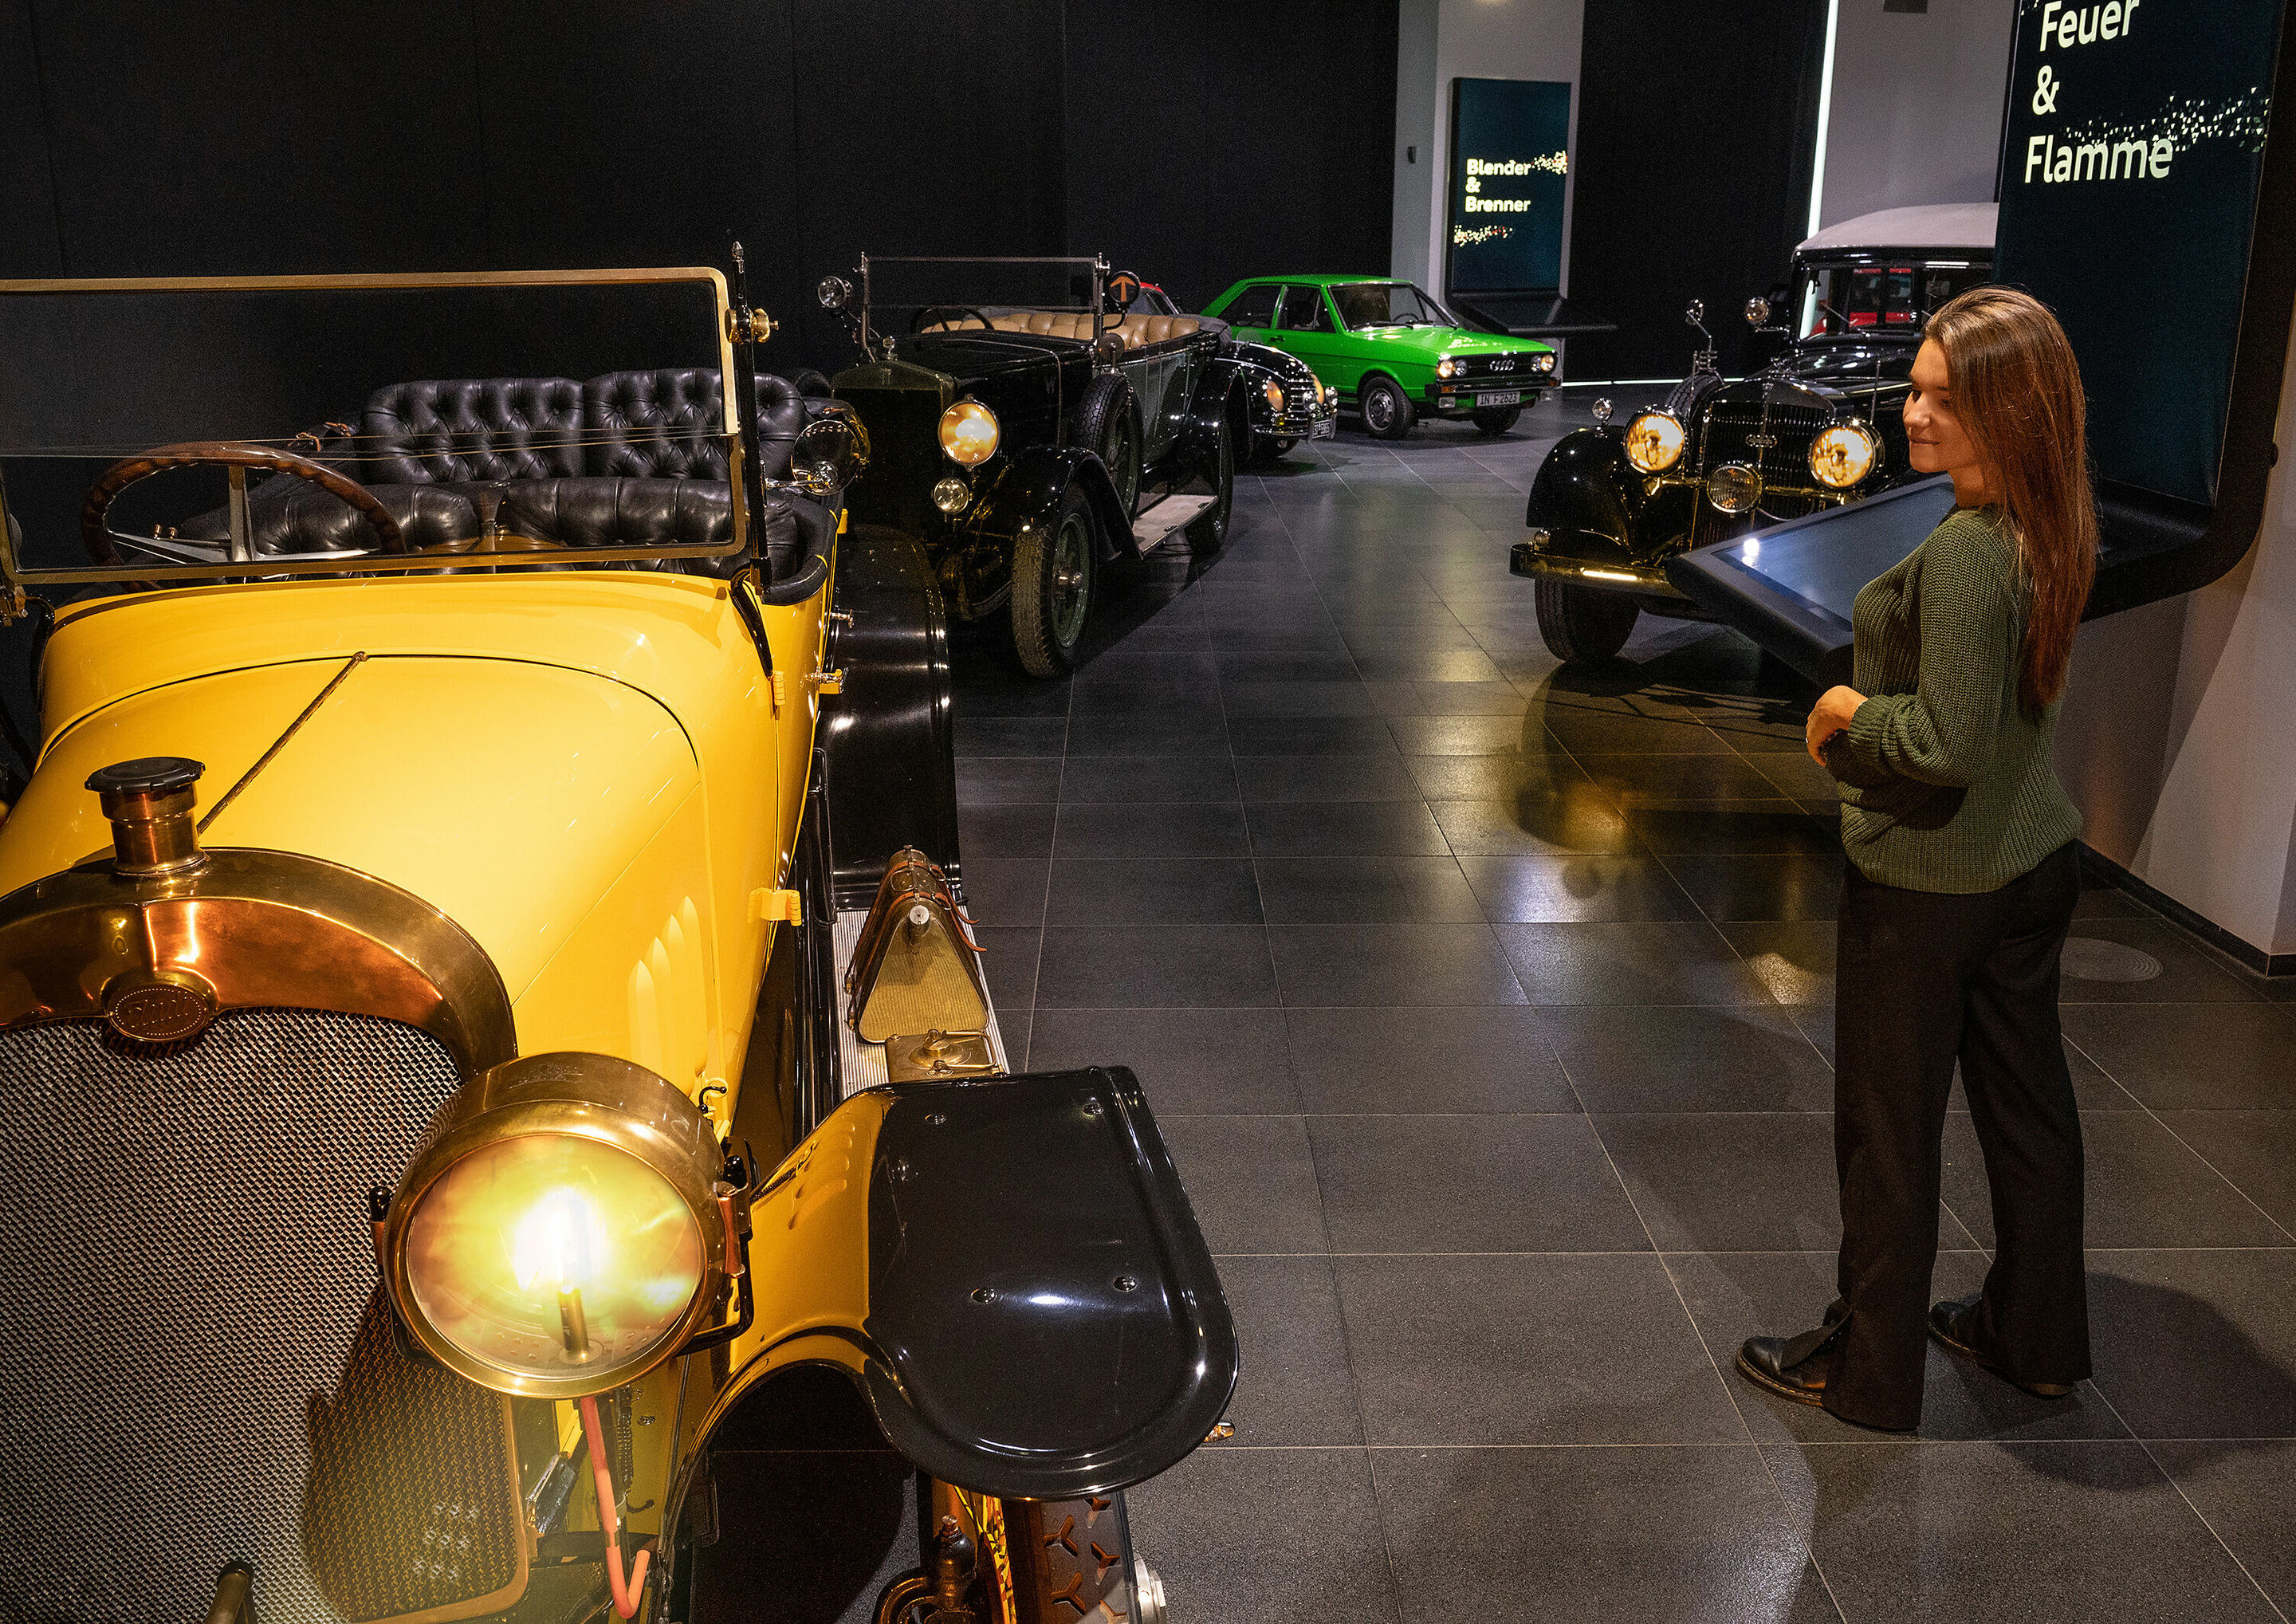 Automotive history in the spotlight: Special exhibition “The Speed of Light” at the Audi museum mobile